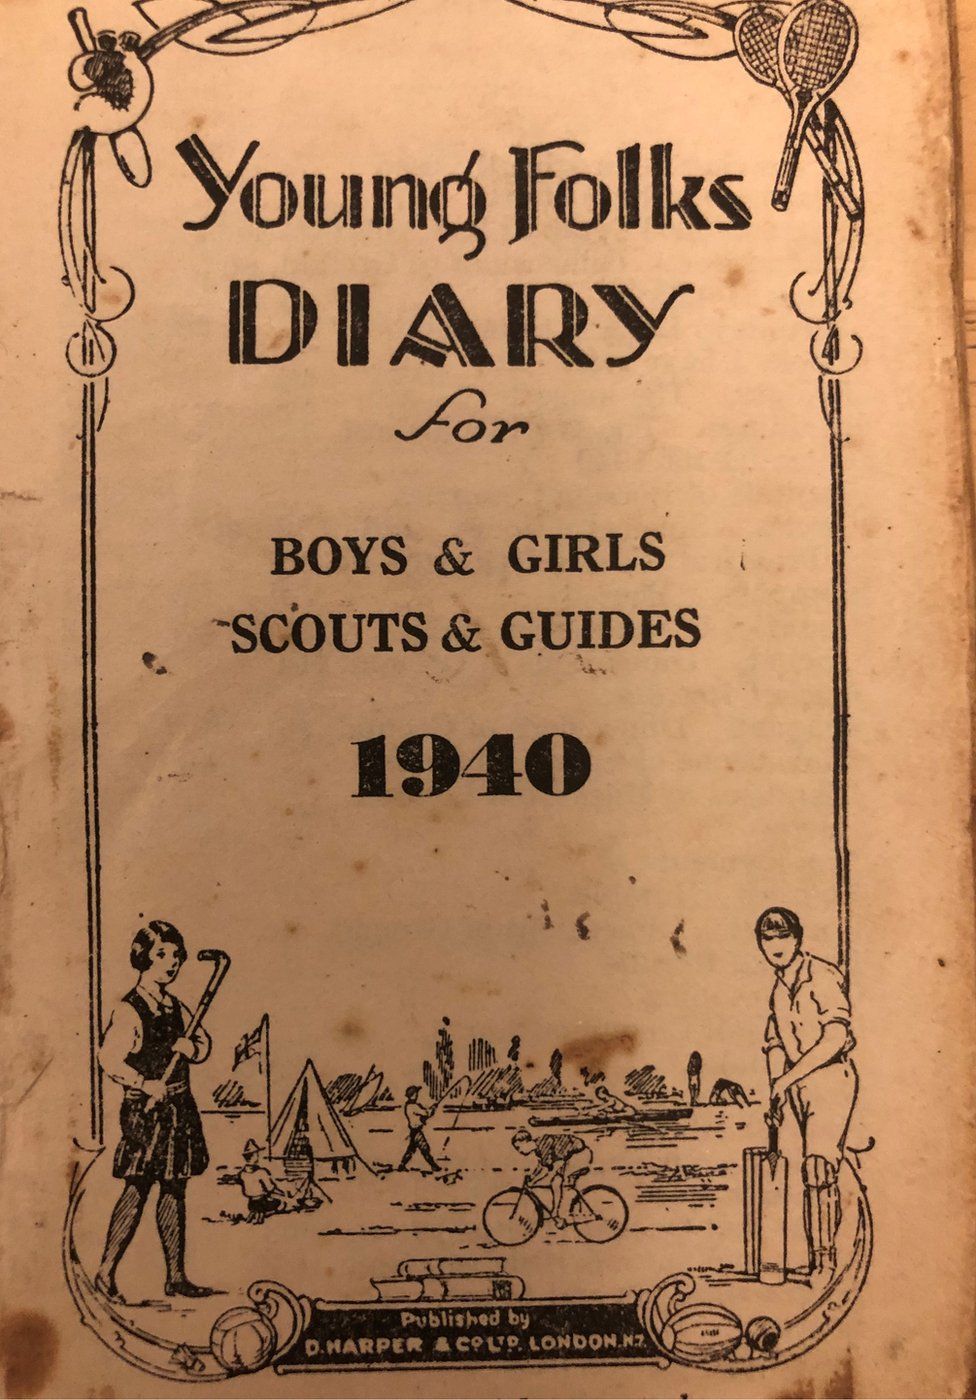 A young folks diary dating from 1940